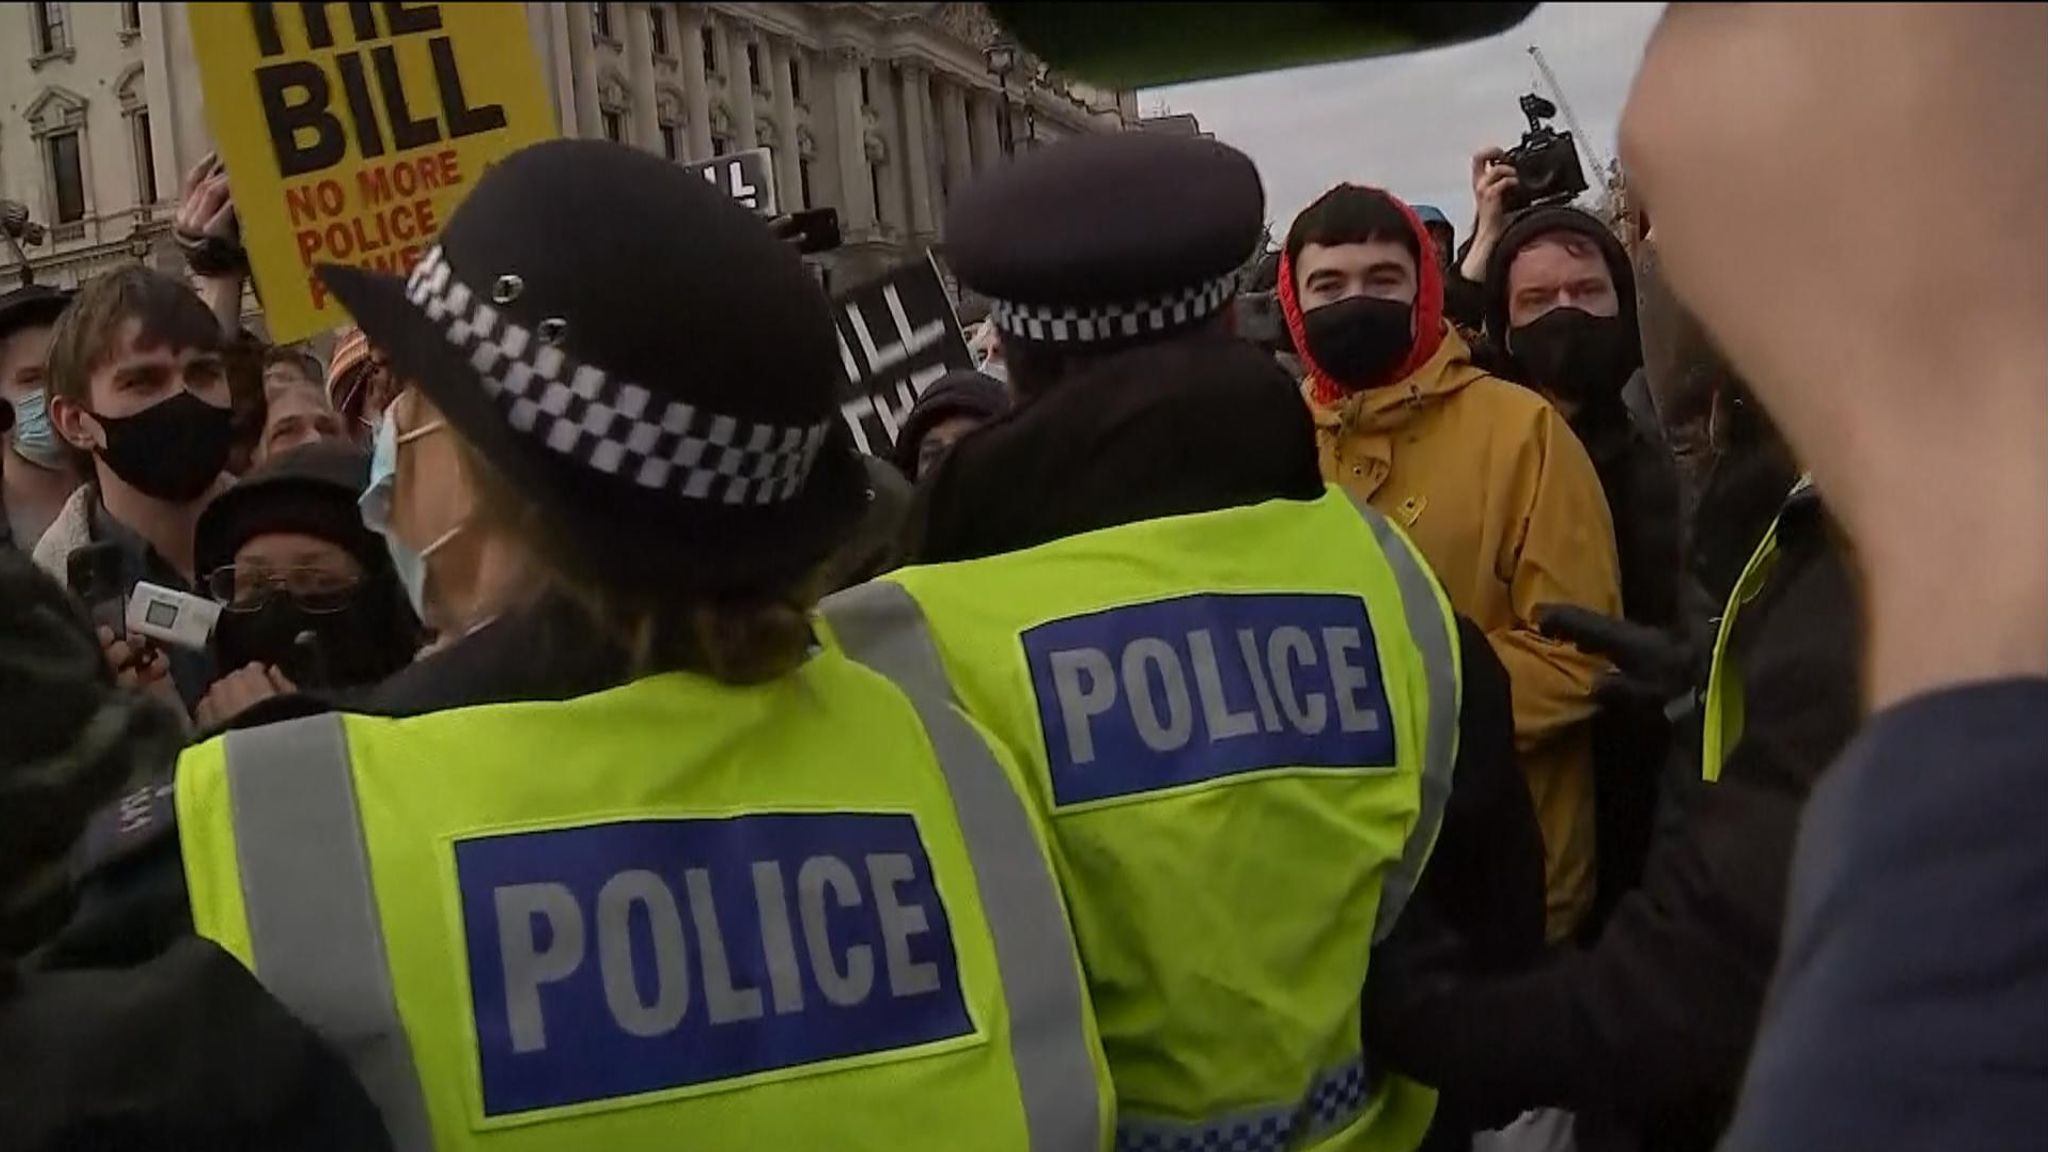 Police and demonstrators clash at 'Kill the Bill' protest in central